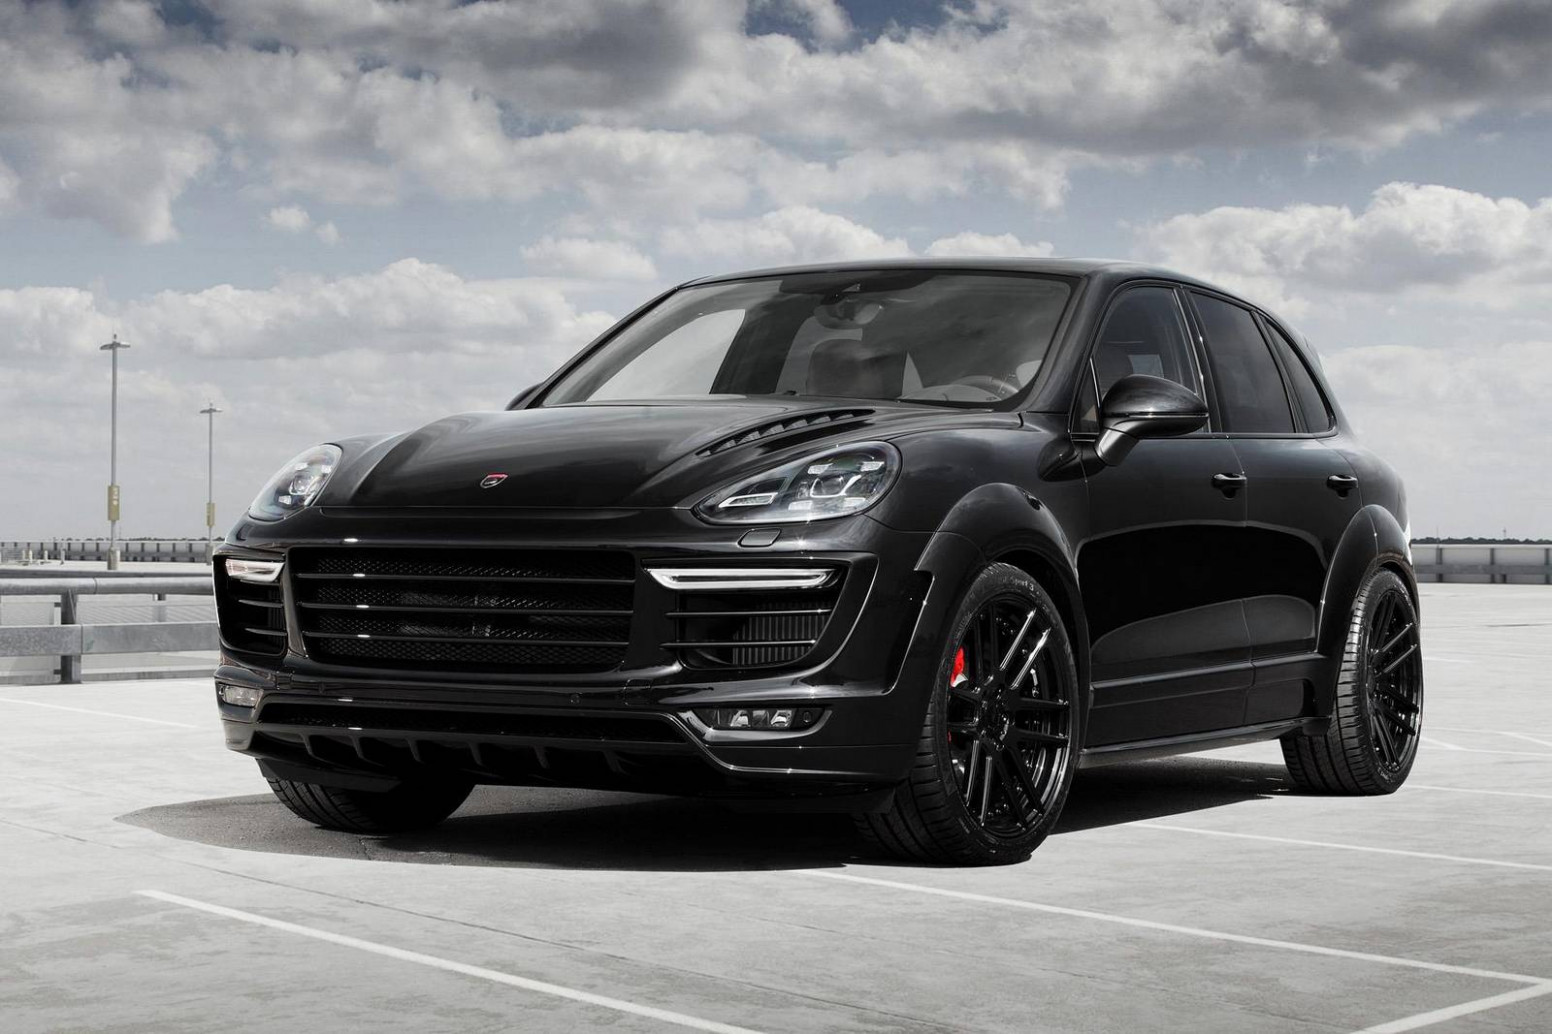 Redesign and Concept porsche cayenne blacked out